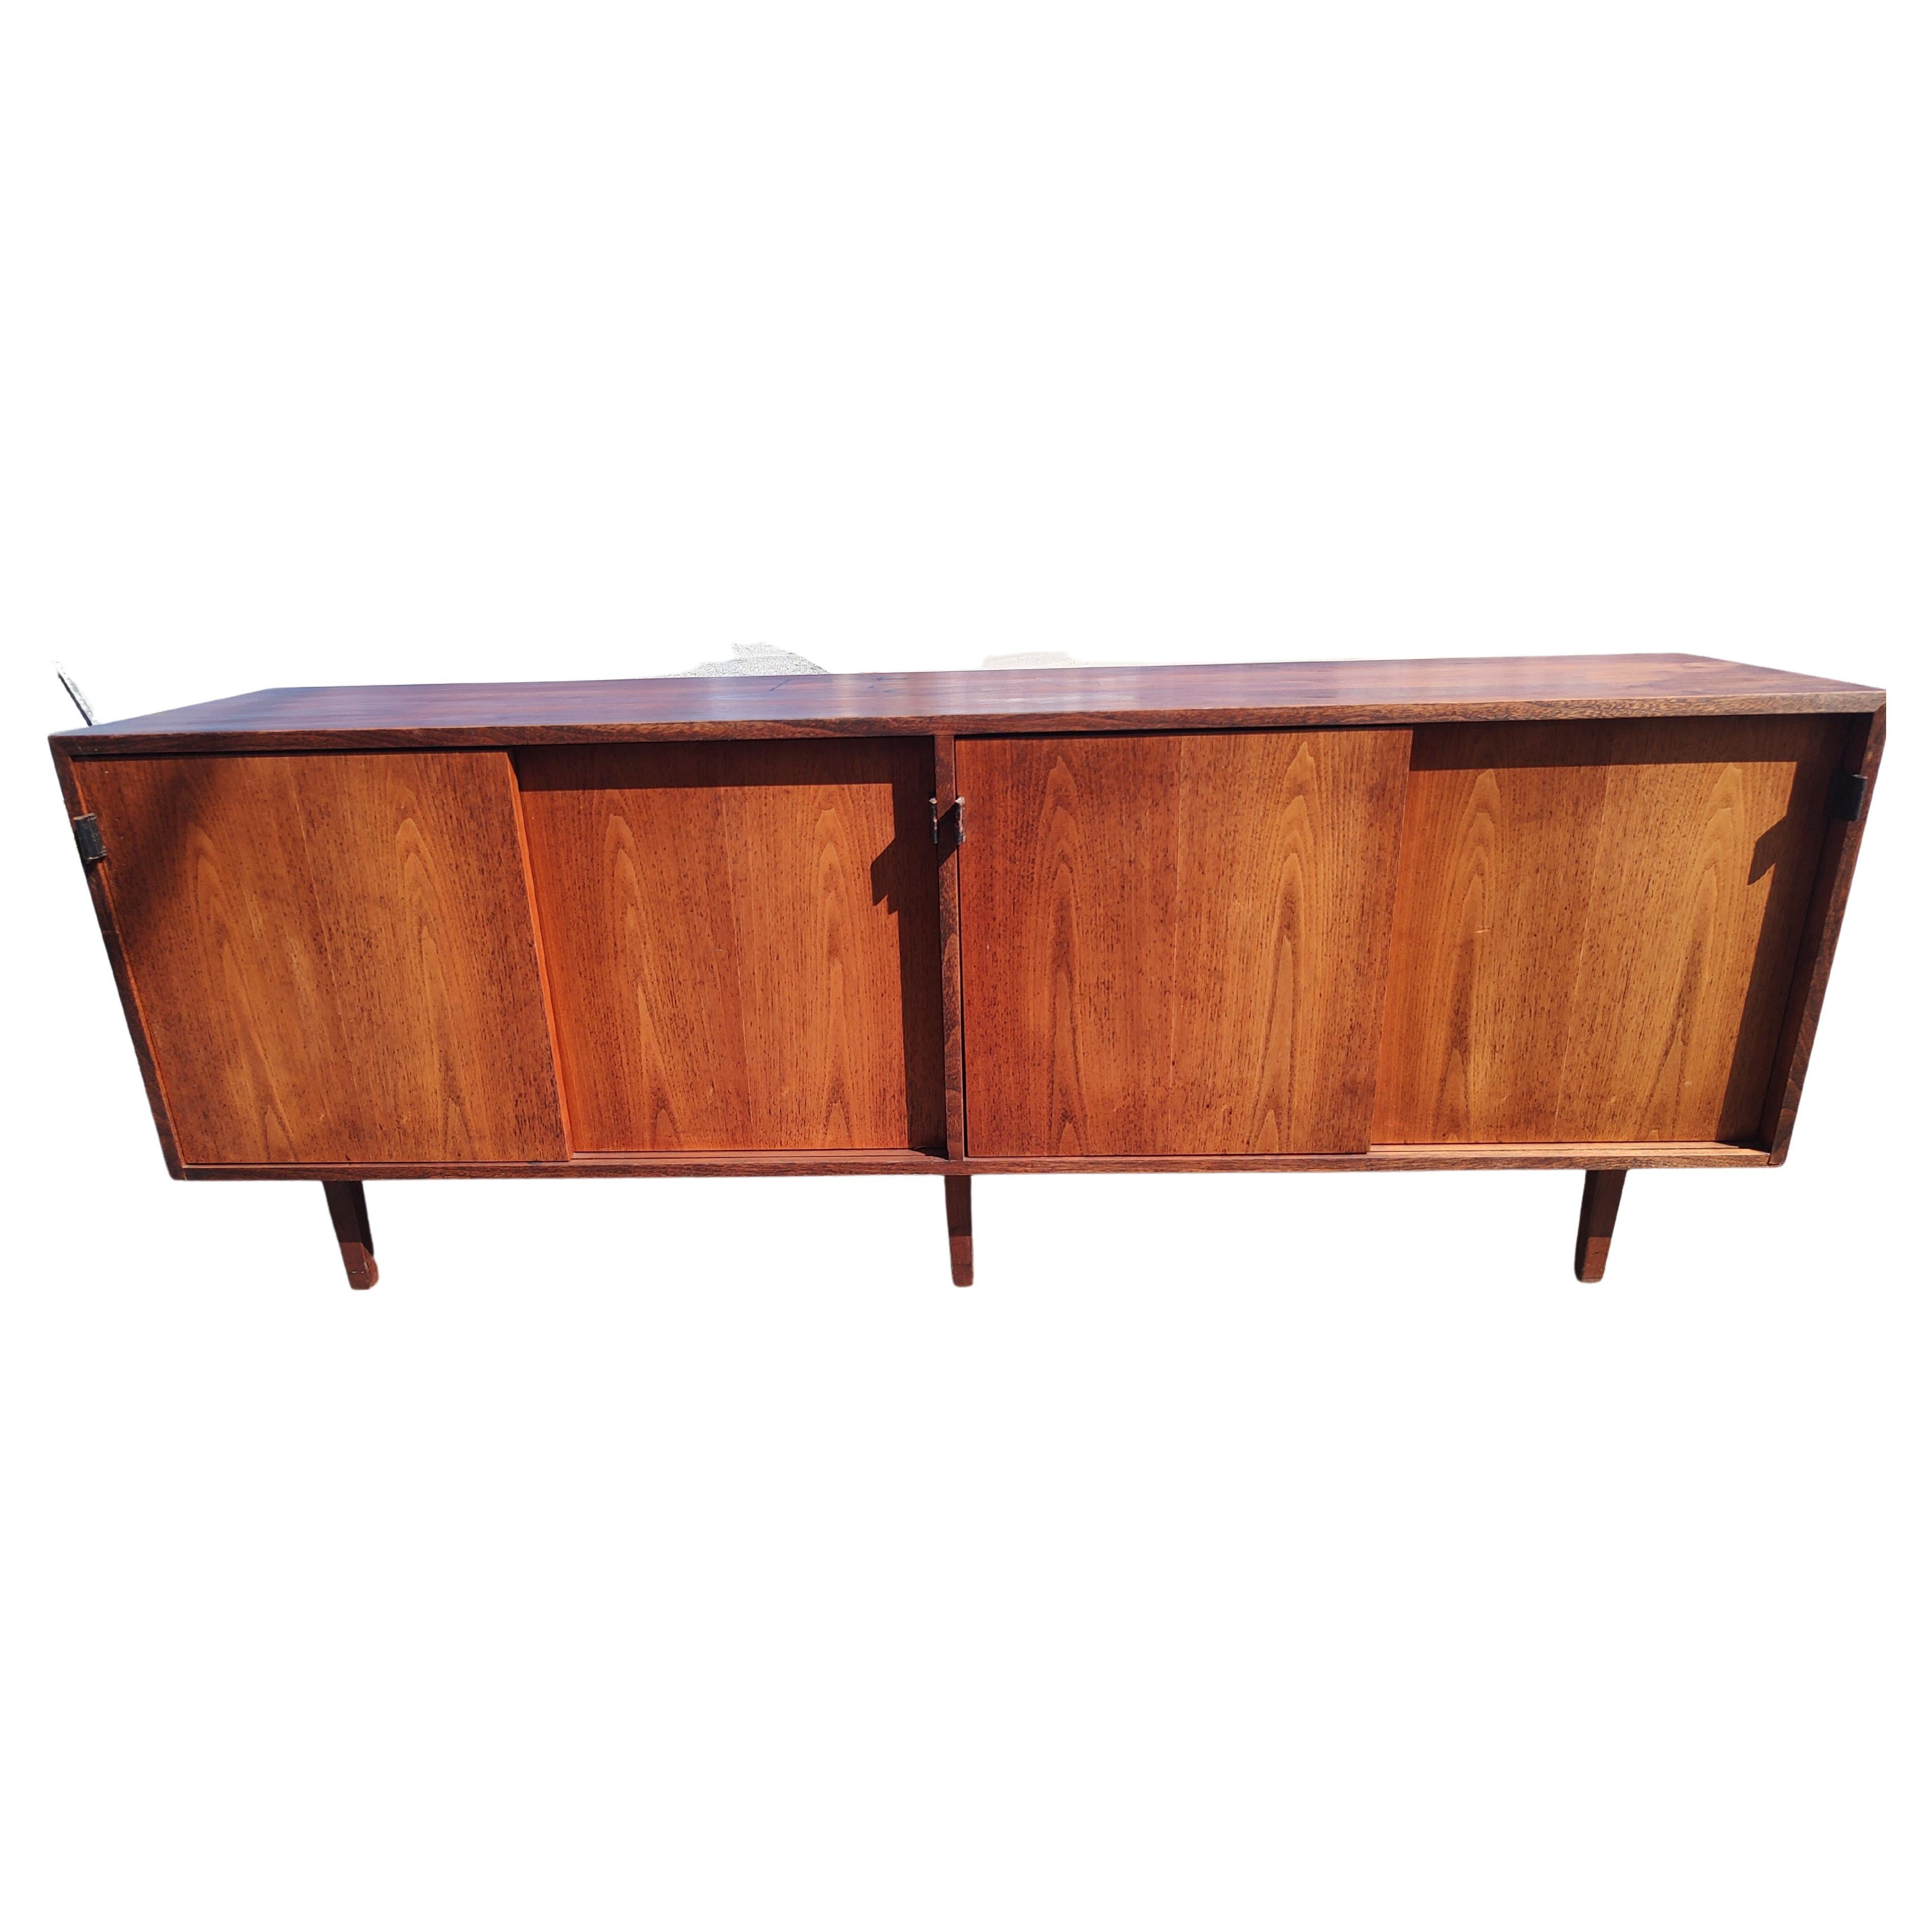 Mid Century Modern 4 Door Early Walnut Credenza by Knoll In Good Condition For Sale In Port Jervis, NY